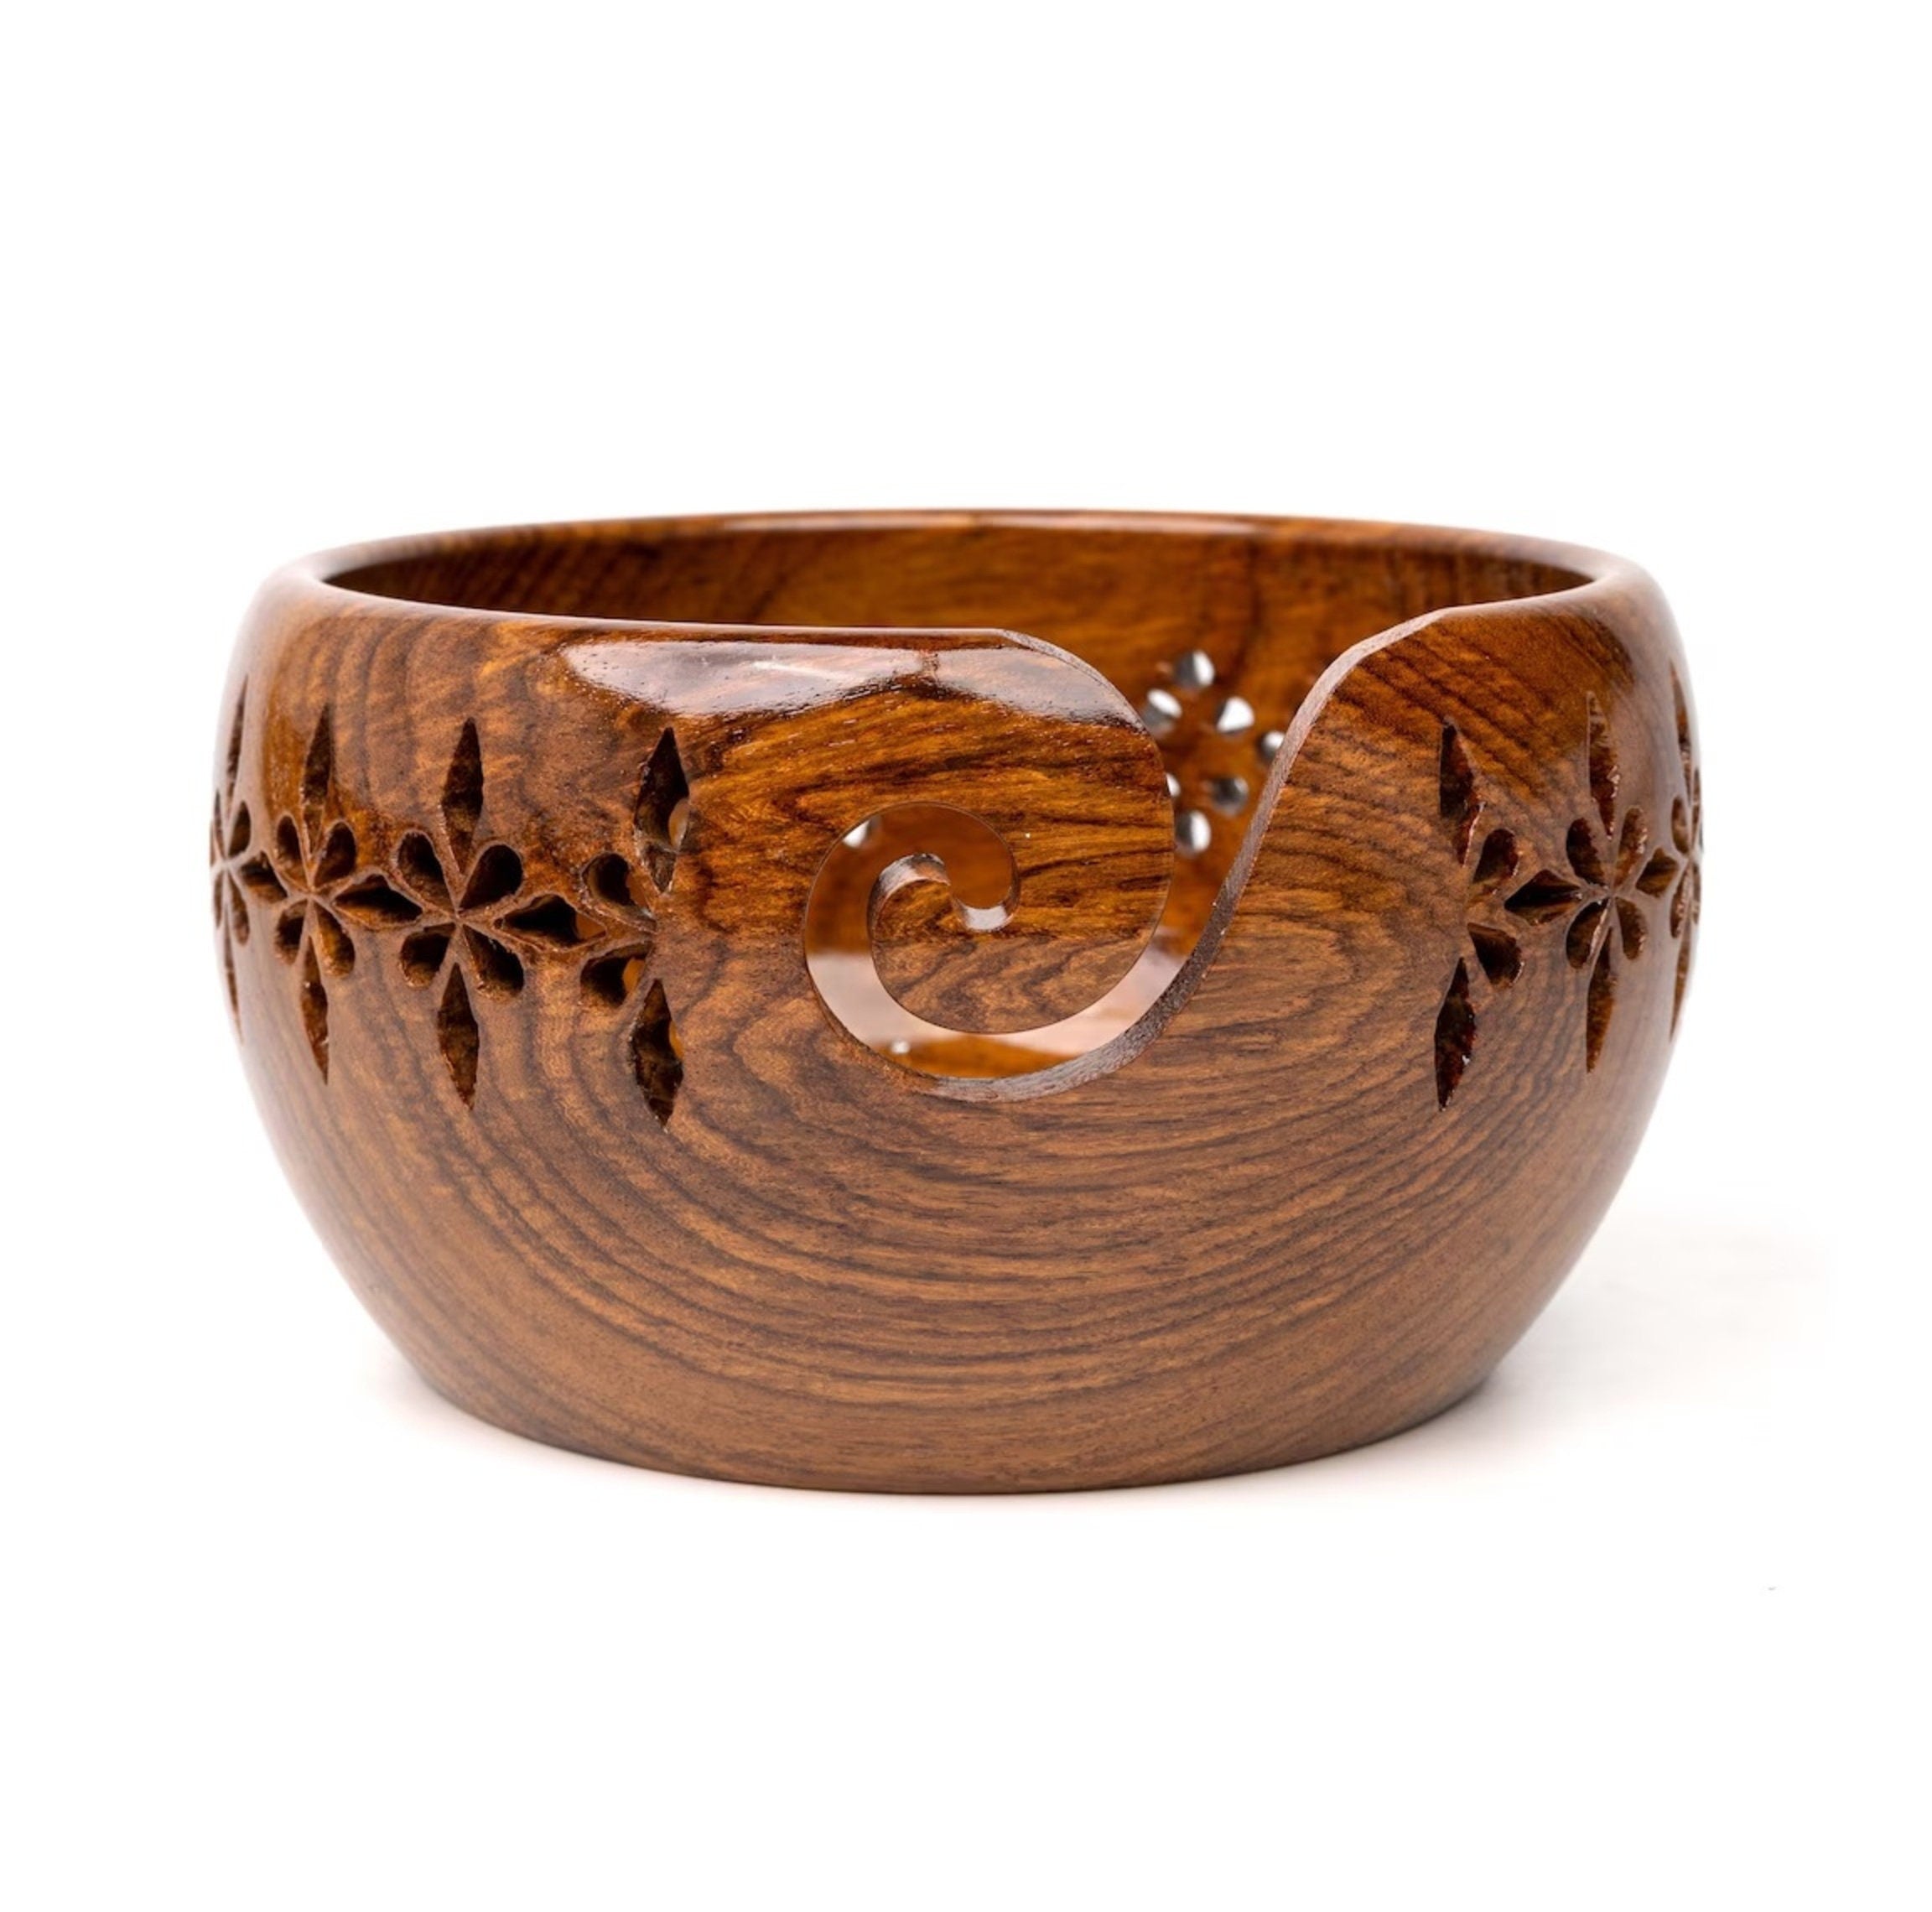 ROSEWOOD Yarn Bowl 7" x 4" - Handcrafted Wooden Yarn Bowl - Large Yarn Bowl for Knitting and Crocheting | Mother's Day Gift